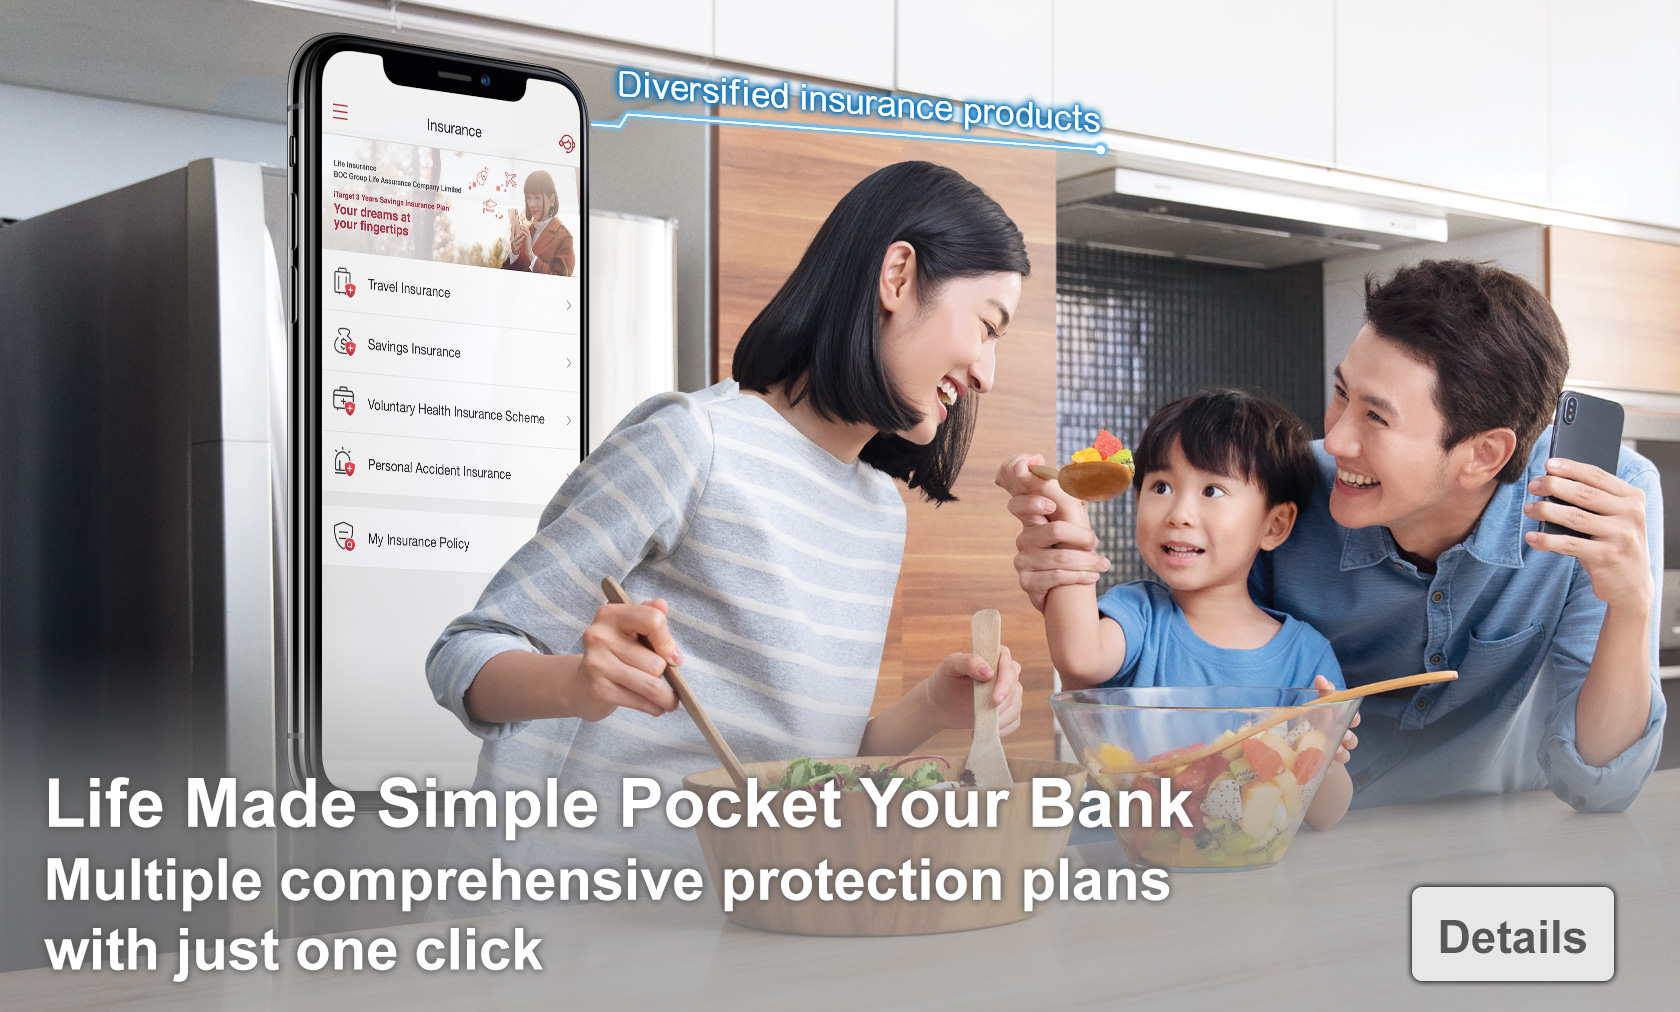 Life Made Simple Pocket Your Bank
        Multiple comprehensive protection plans with just one click